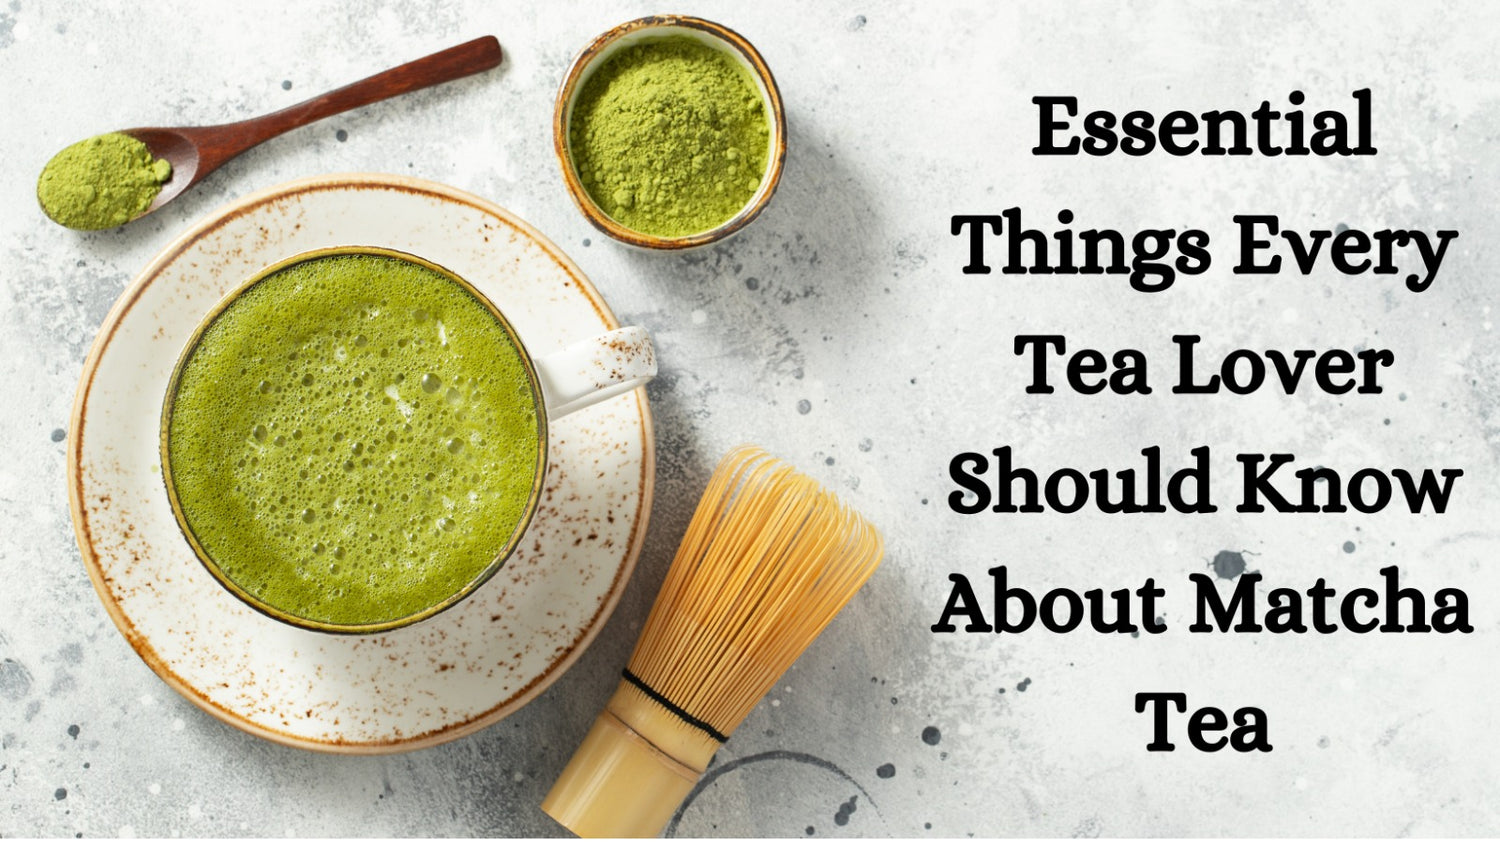 Essential Things Every Tea Lover Should Know About Matcha Tea